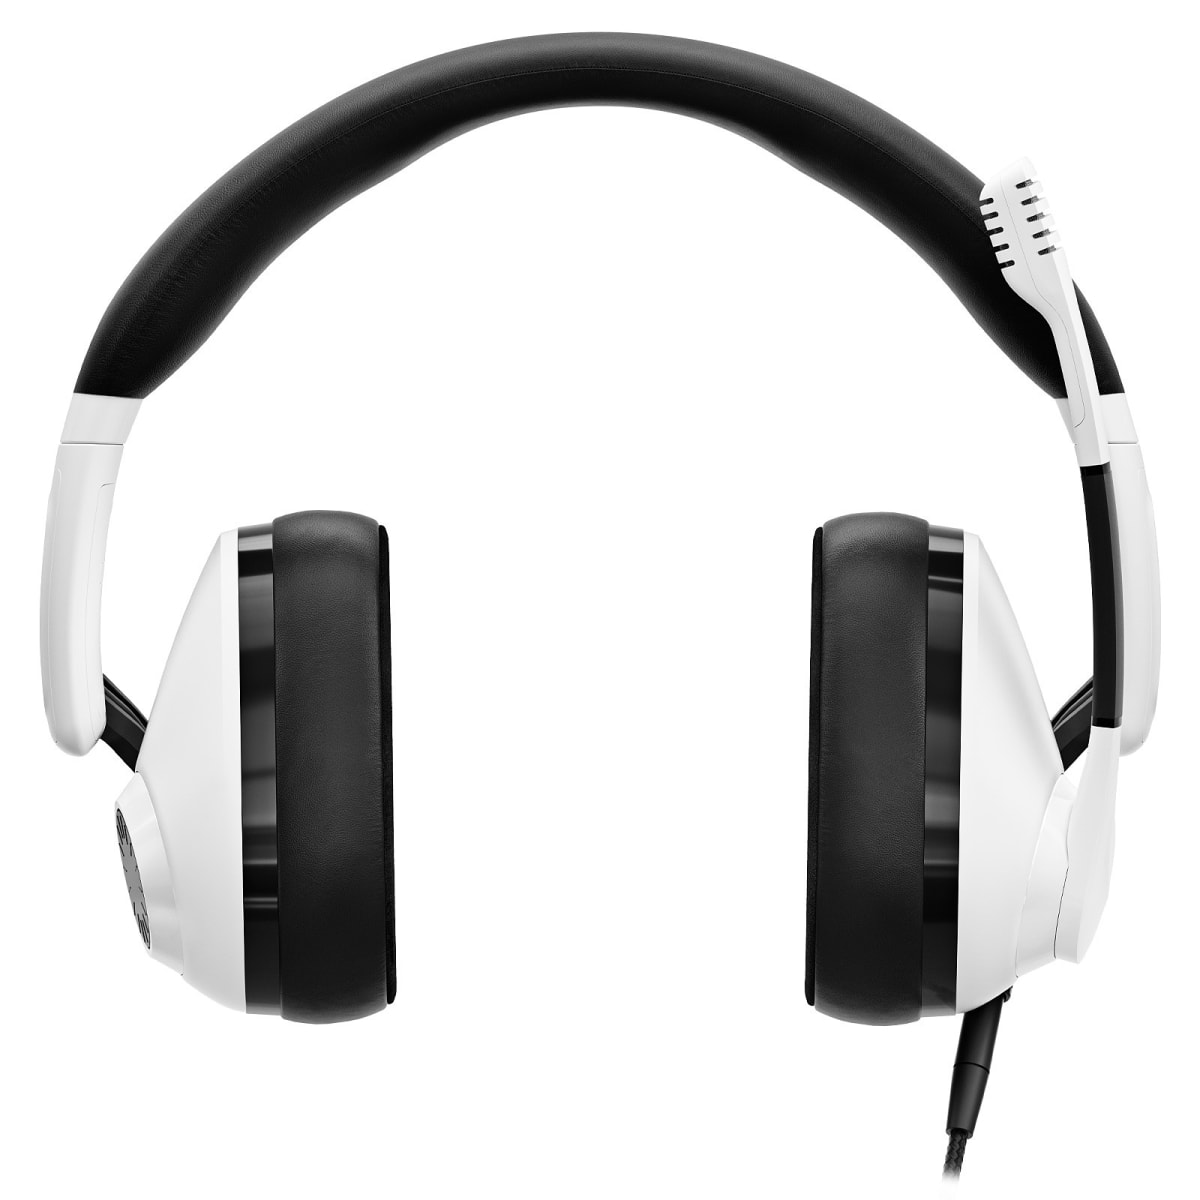 EPOS 1000889 H3 Gaming WHITE, Over-ear Weiß Headset